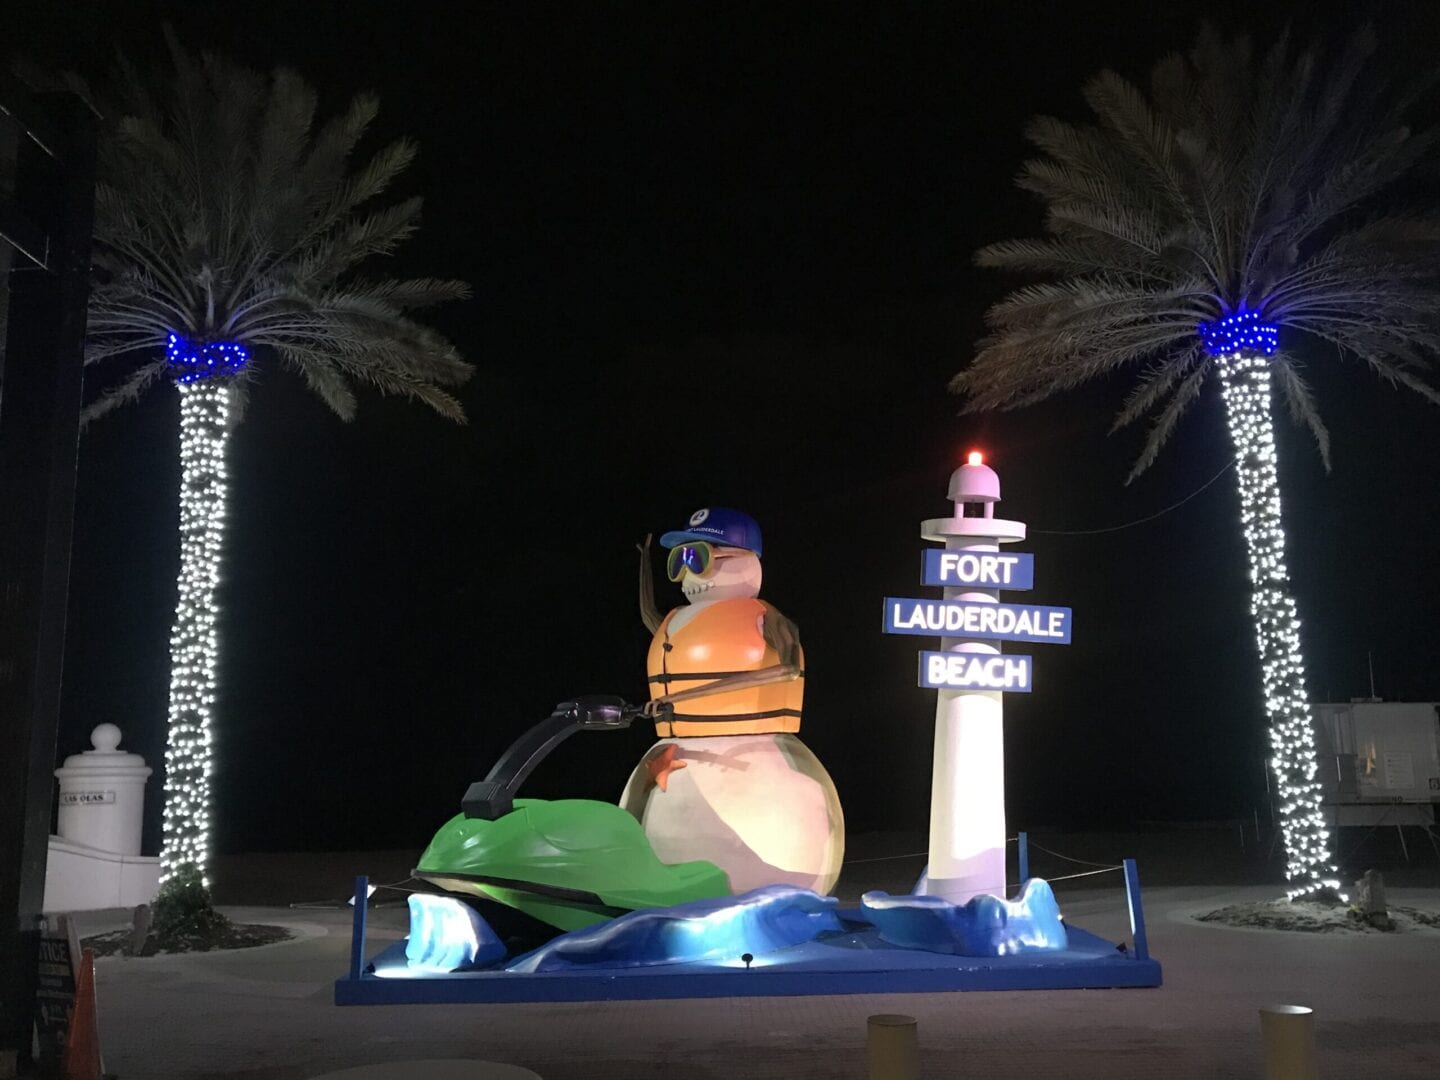 Snowman on a jetski and a lighthouse with a sign “Fort Lauderdale Beach”